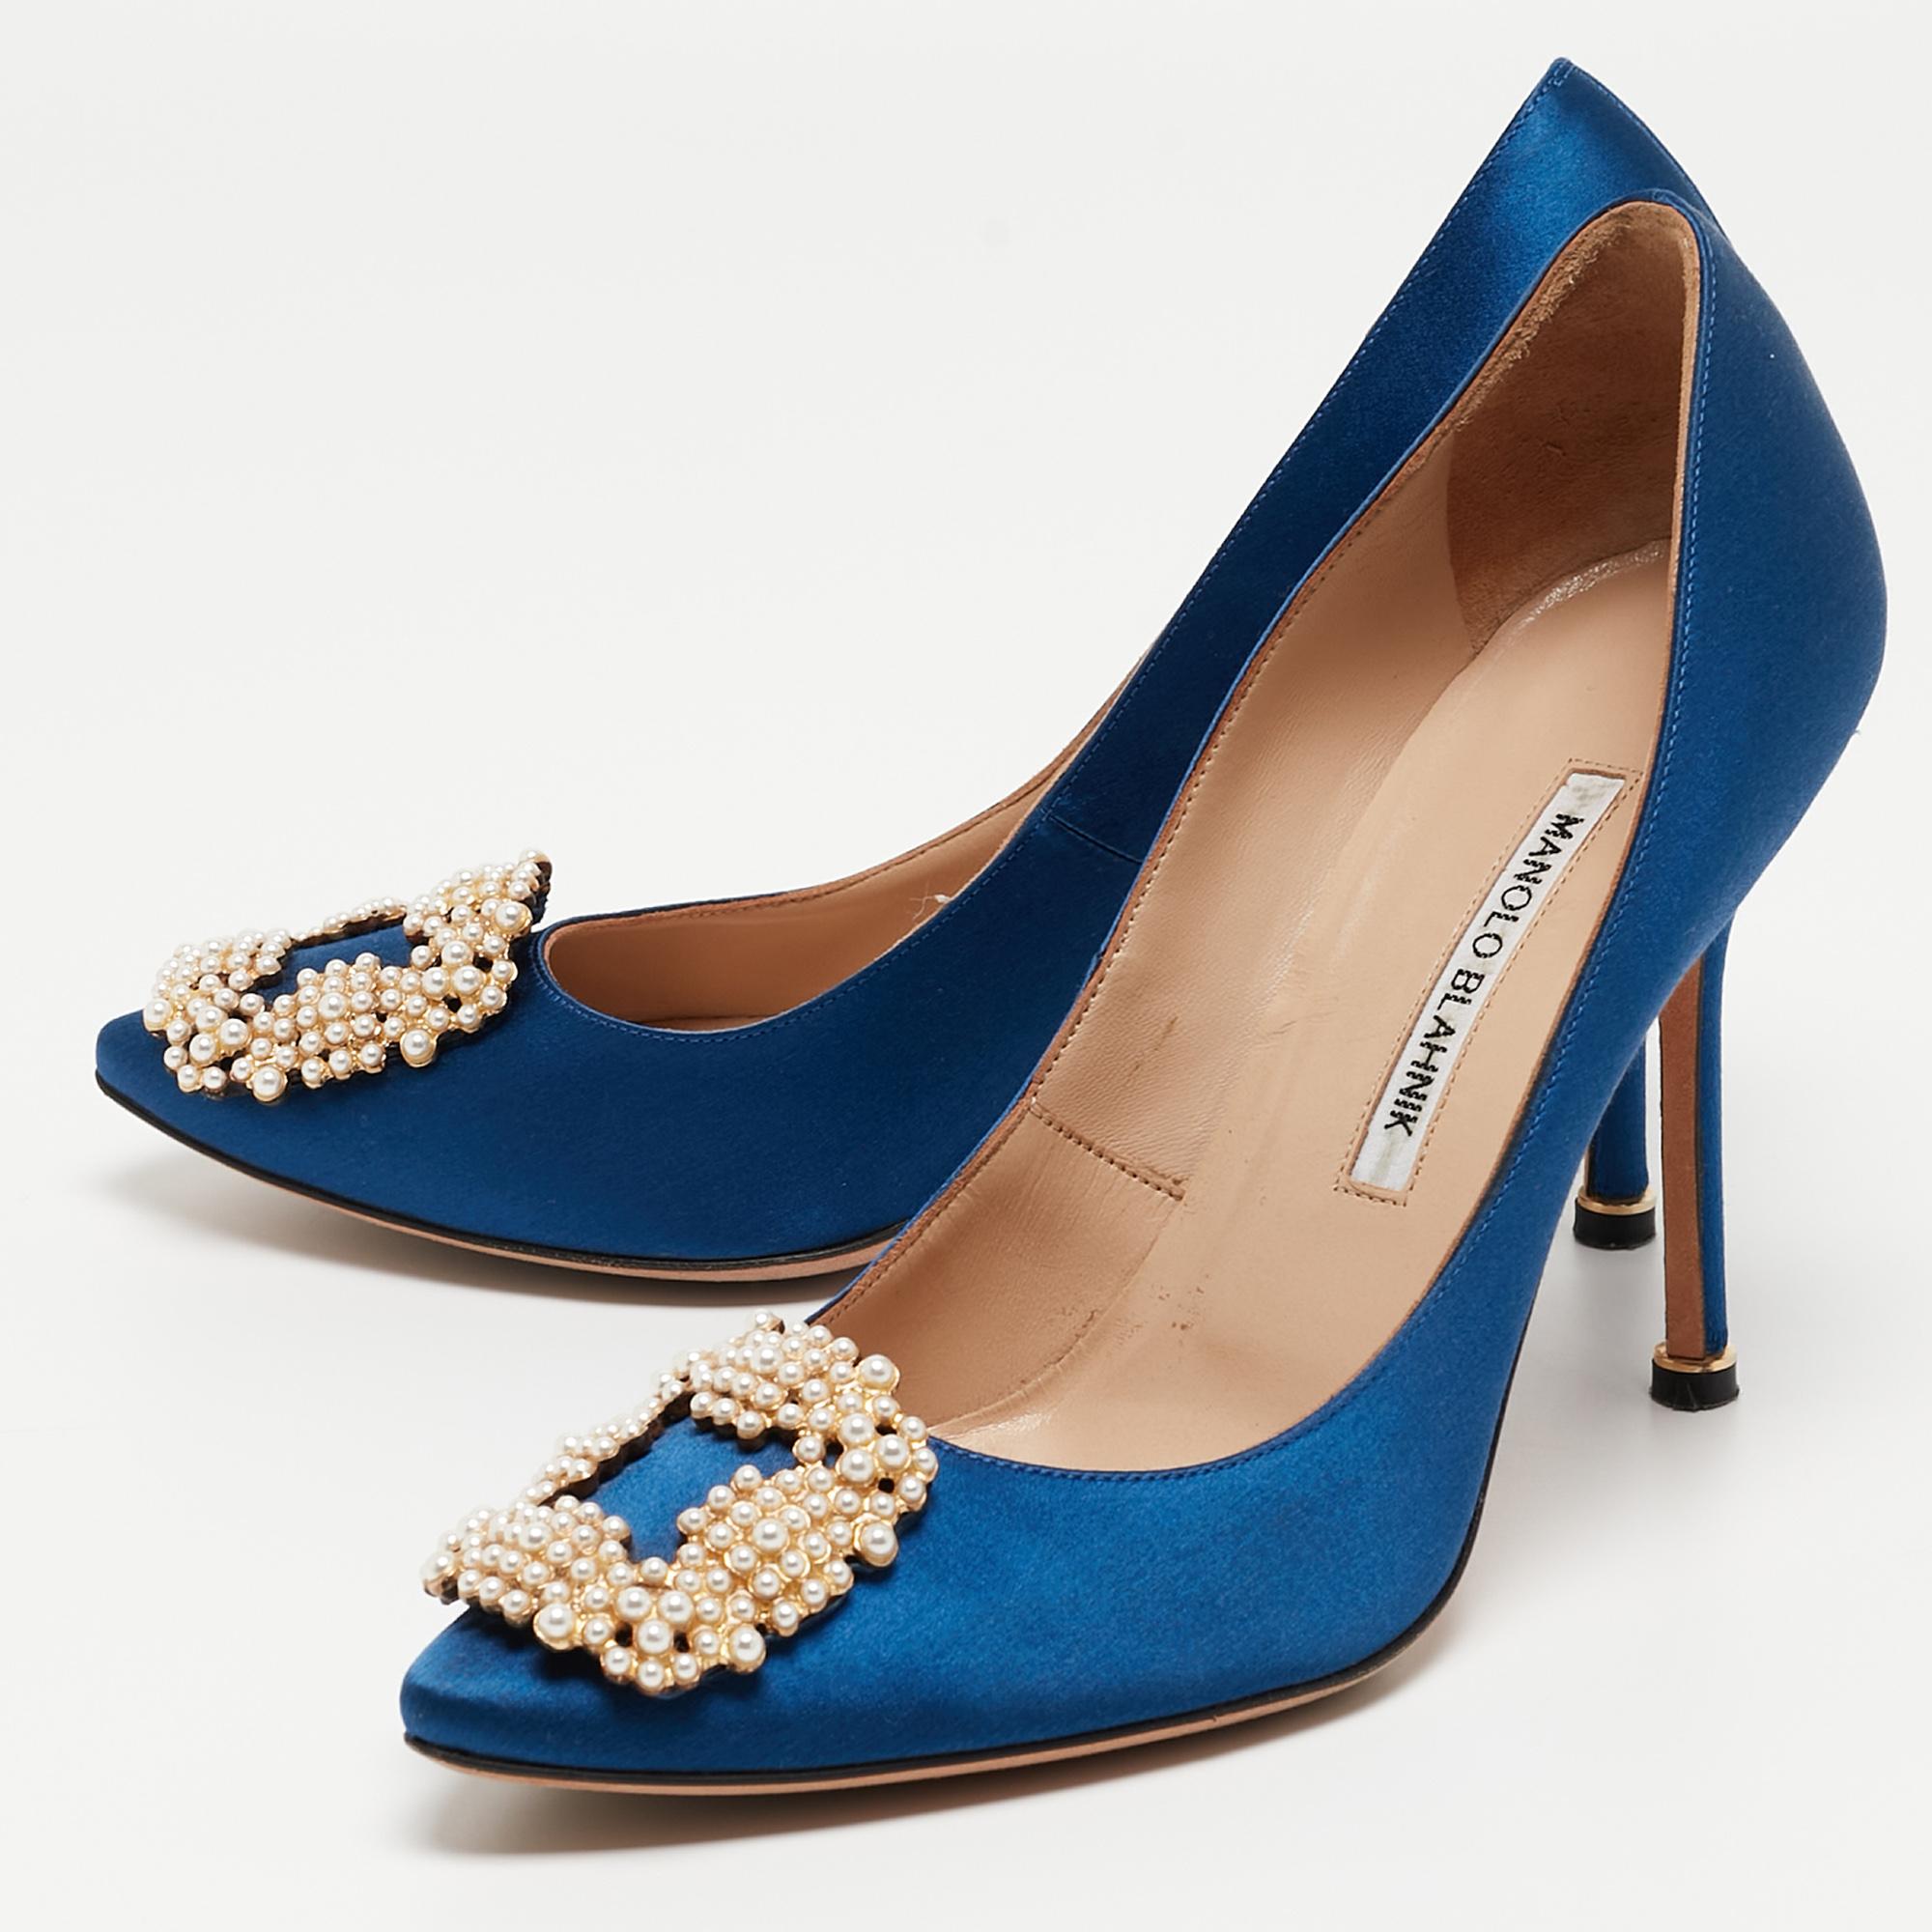 Wonderfully crafted shoes added with notable elements to fit well and pair perfectly with all your plans. Make these Manolo Blahnik blue satin pumps yours today!

